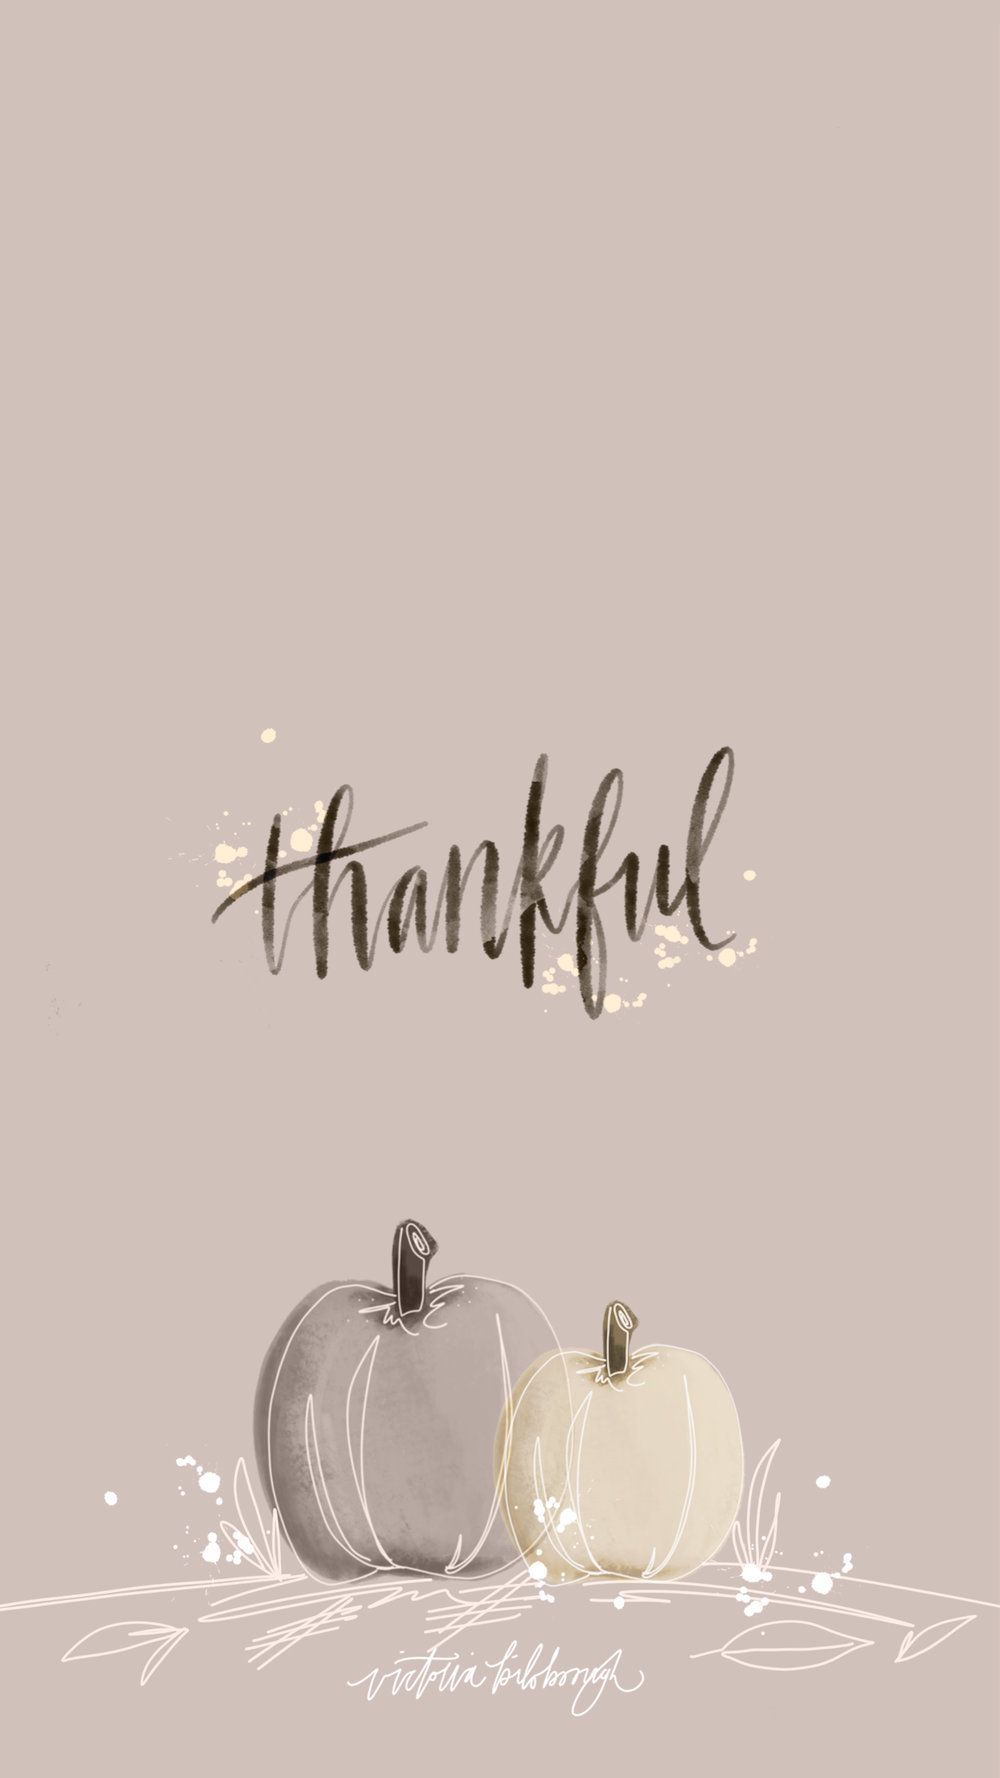 Thankful Backgrounds